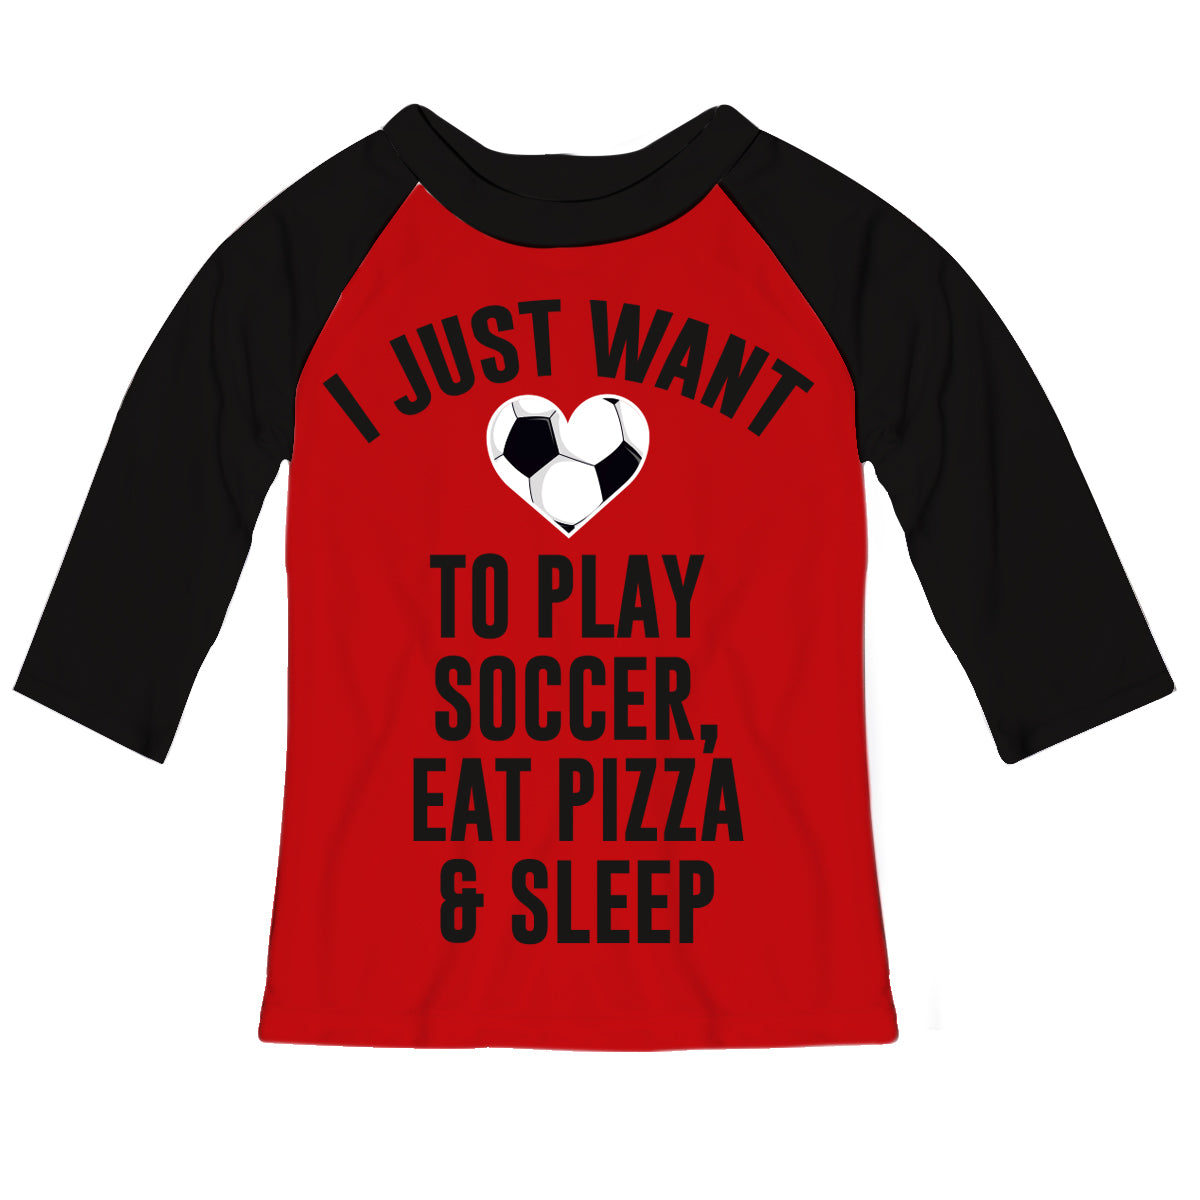 I Just Want Love To Play Soccer Red and Black Tee Shirt 3/4 Sleeve